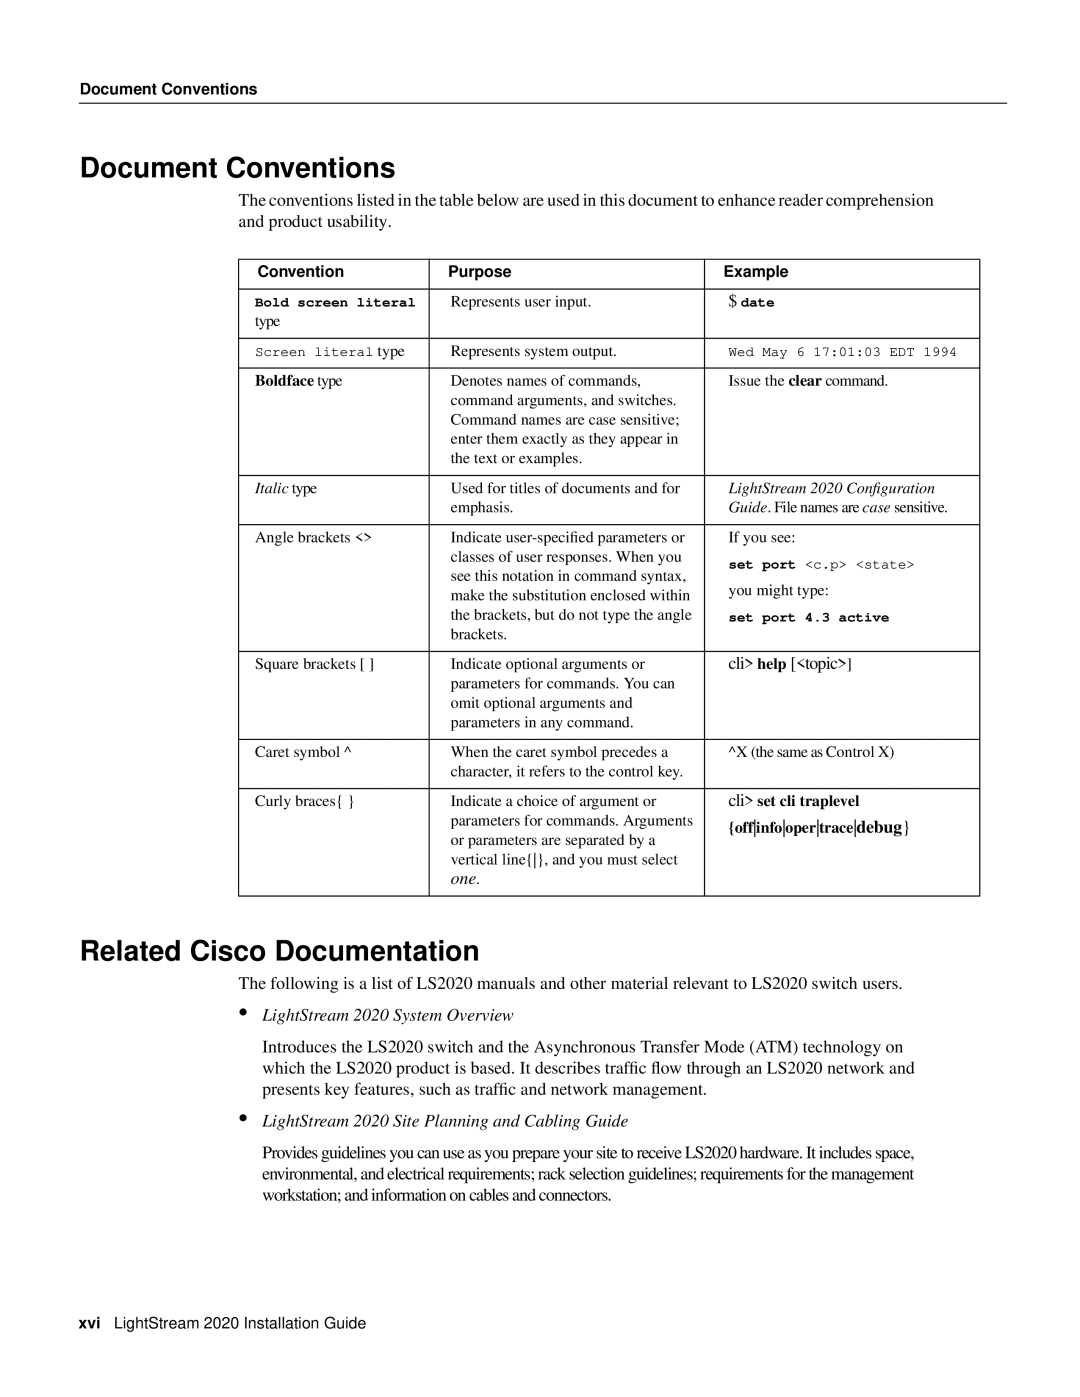 Cisco Systems LS2020 manual Document Conventions, Related Cisco Documentation, LightStream 2020 System Overview 